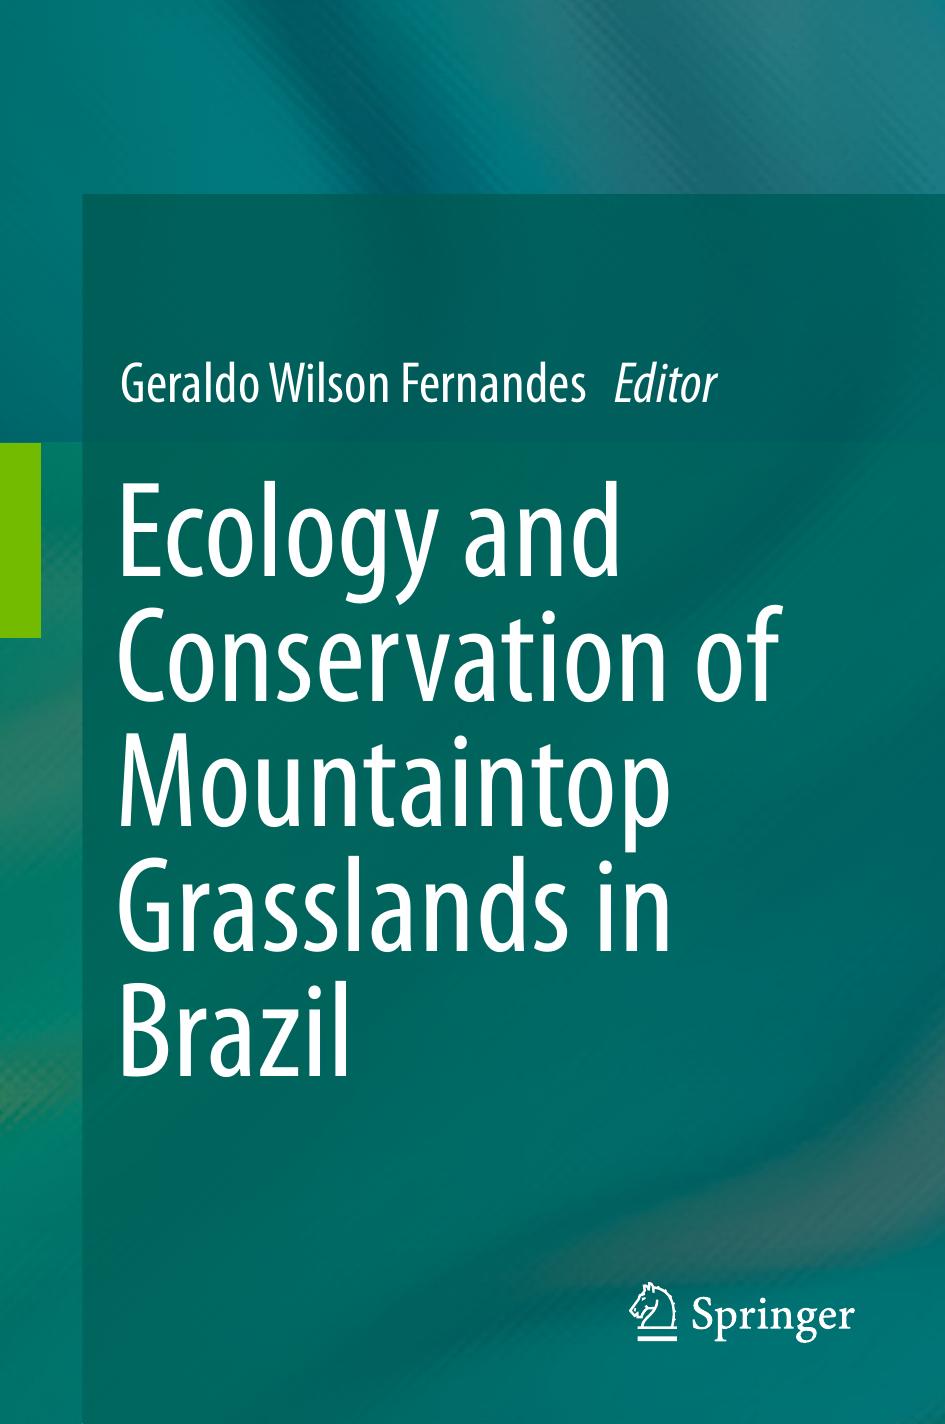 Ecology and Conservation of Mountaintop grasslands in Brazil 2016